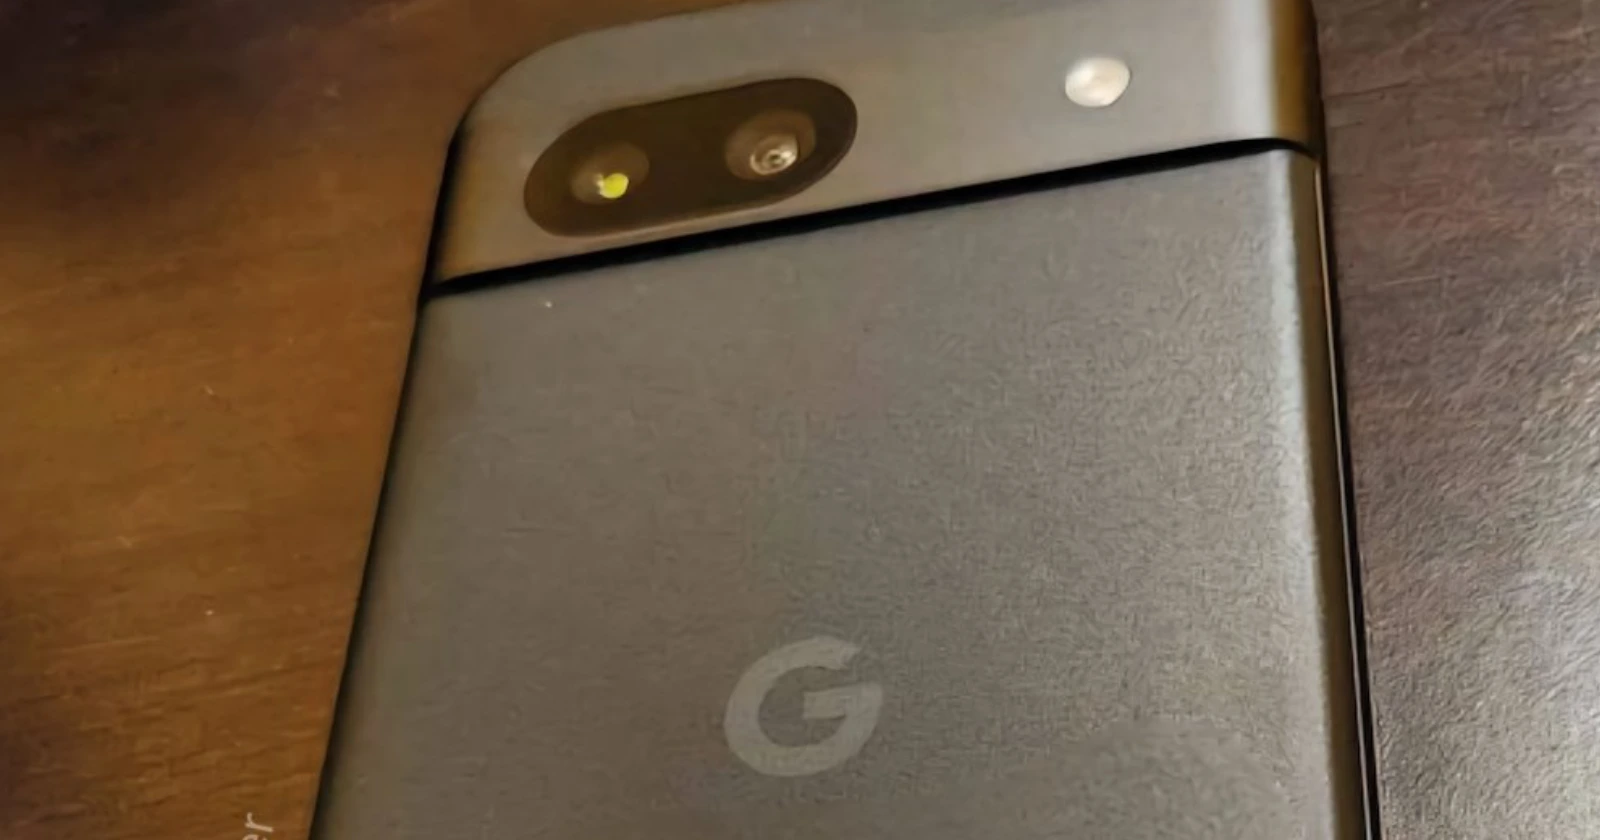 Google Pixel 8a leaked in new images with a questionable design